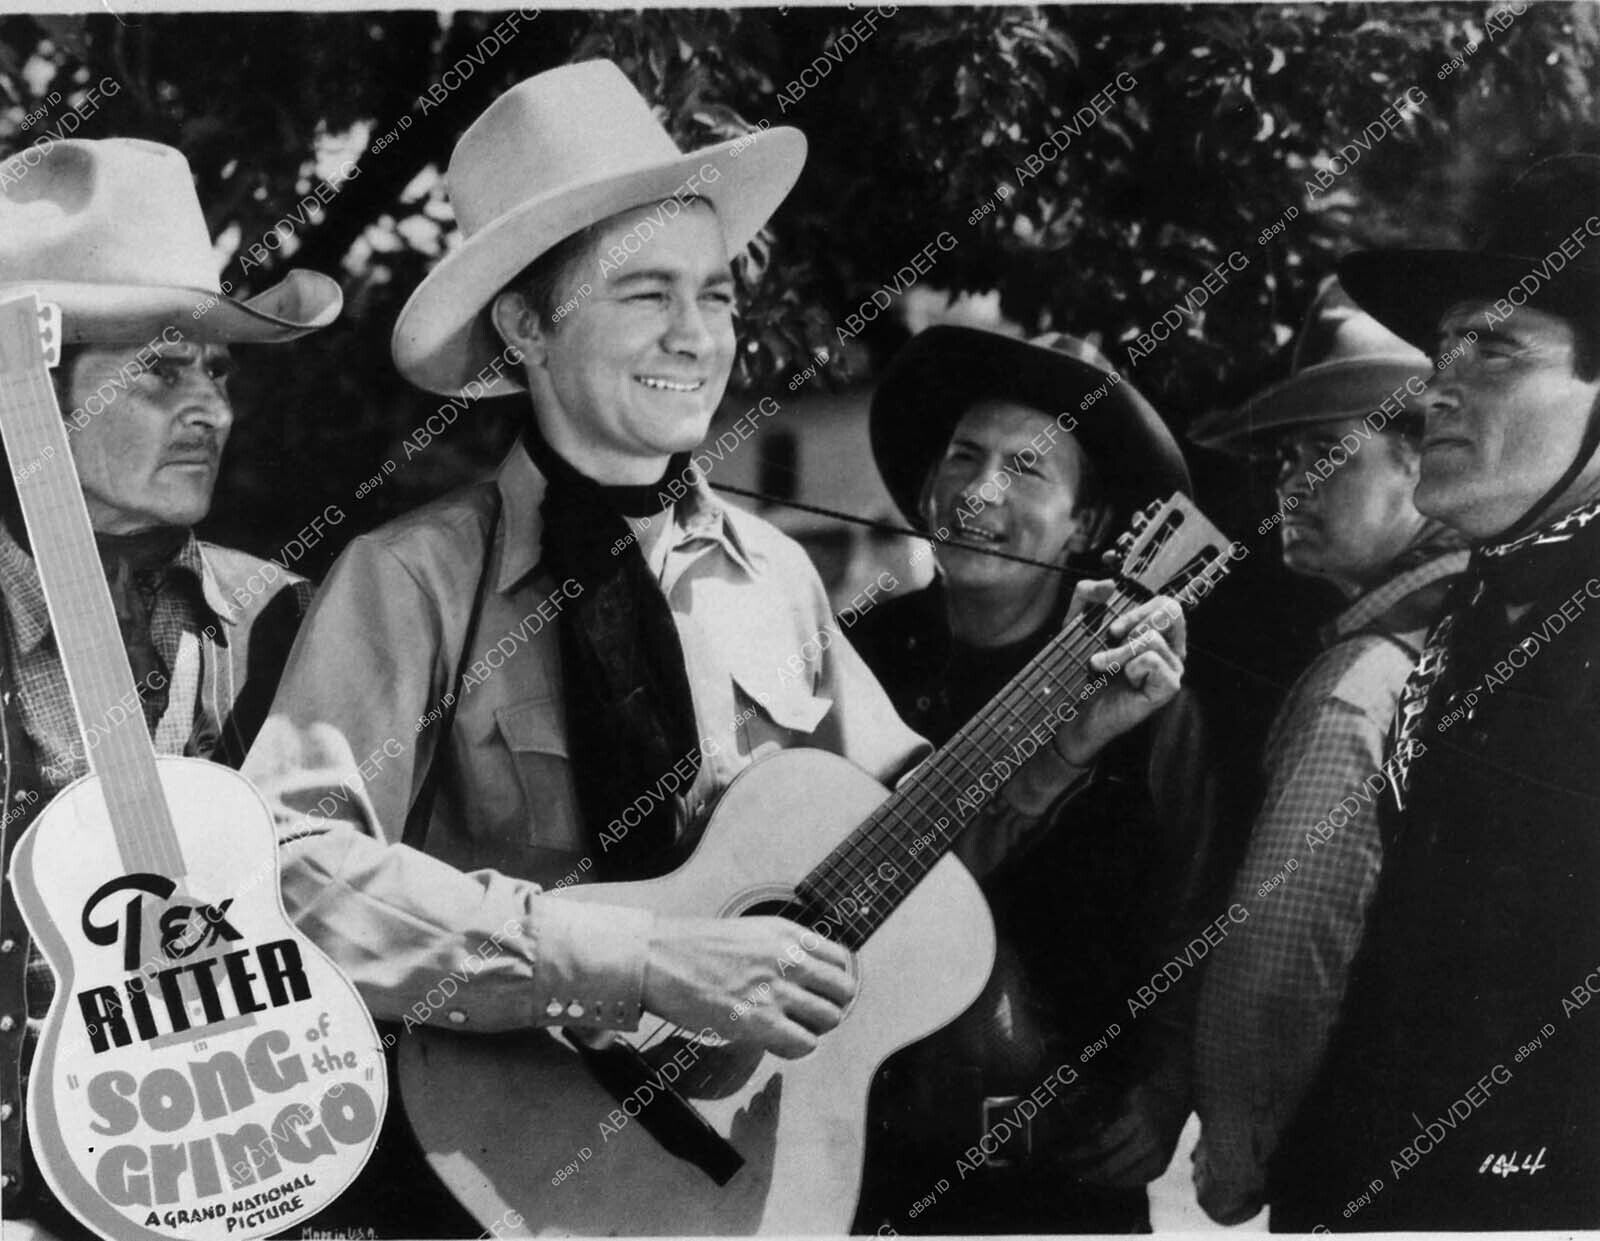 2062-09 Tex Ritter and his guitar Song the Gringo 2062-09 |